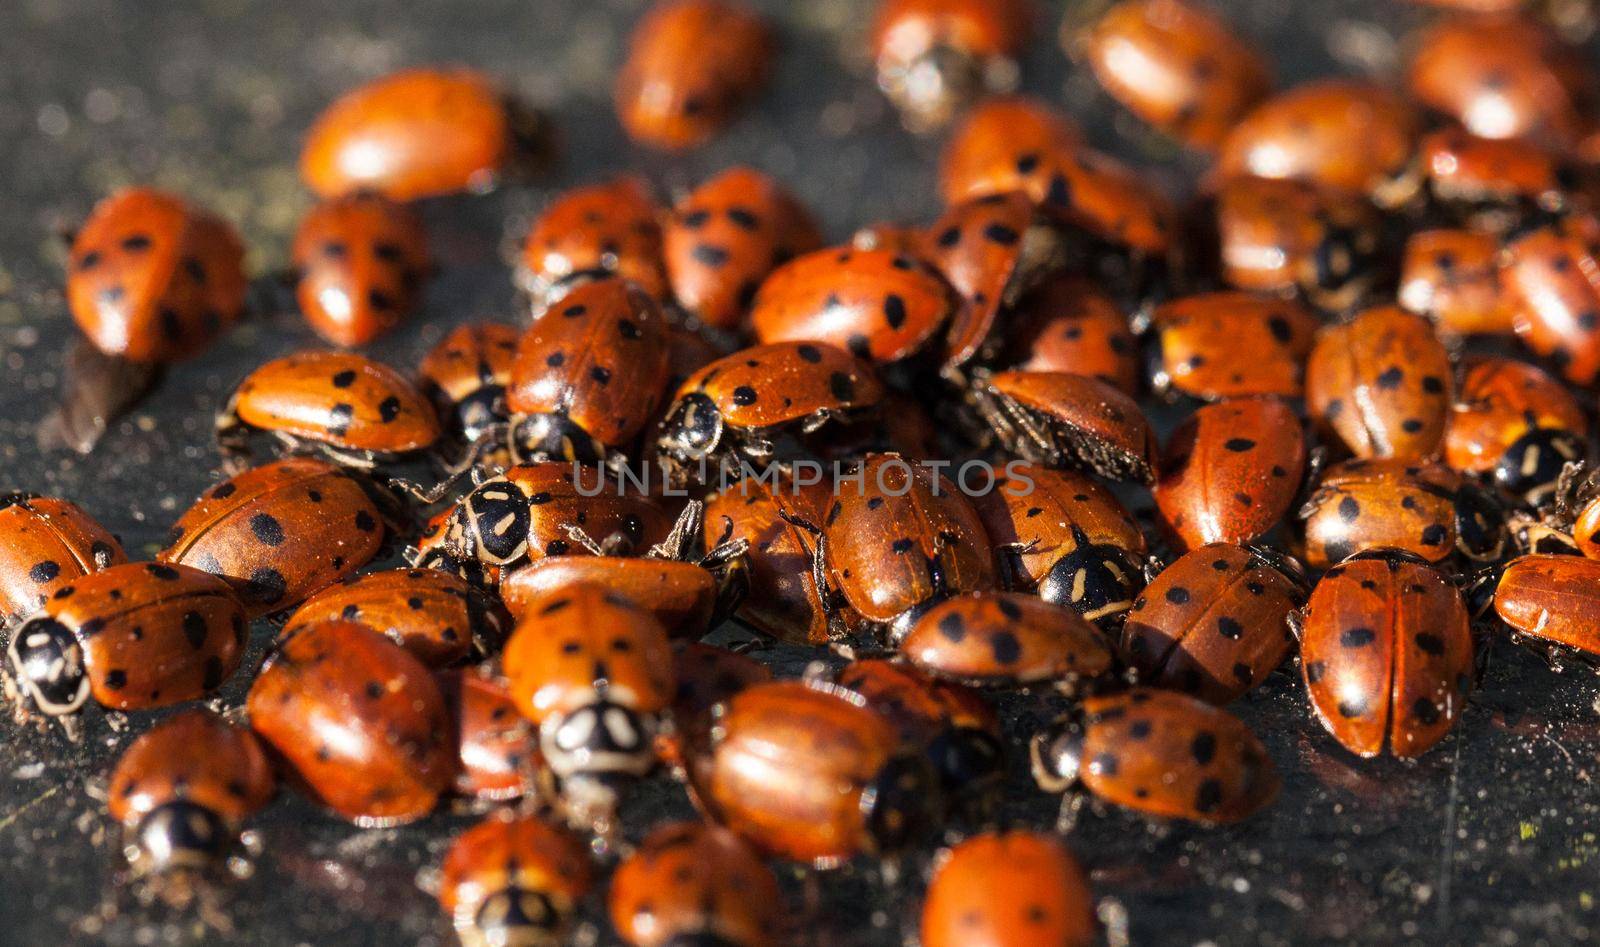 Hibernating cluster of Convergent lady beetle also called the ladybug Hippodamia convergens